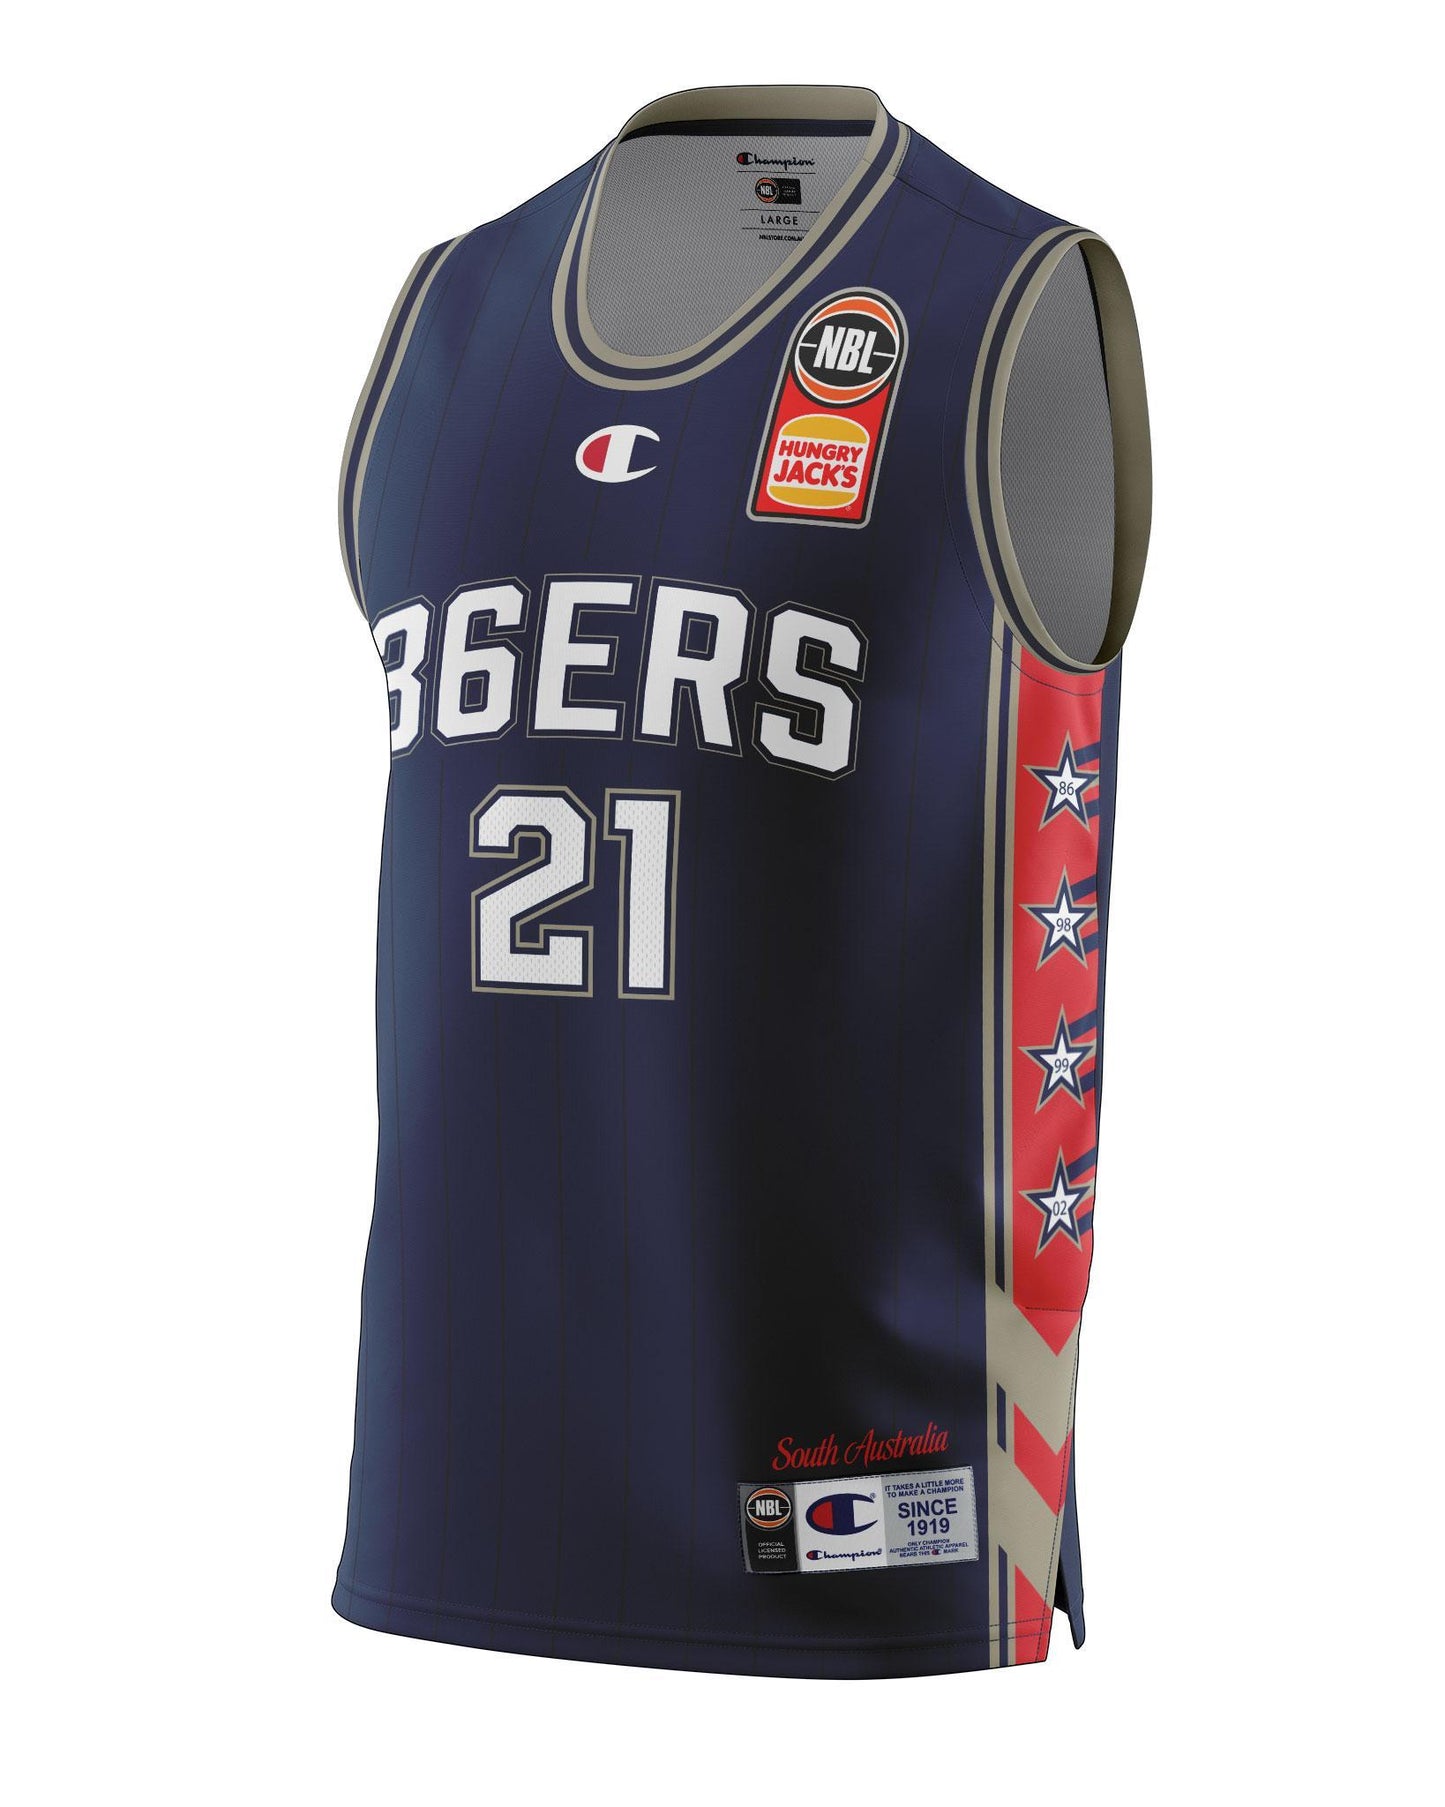 Adelaide 36ers 2021/22 Authentic Home Youth Jersey - Daniel Johnson